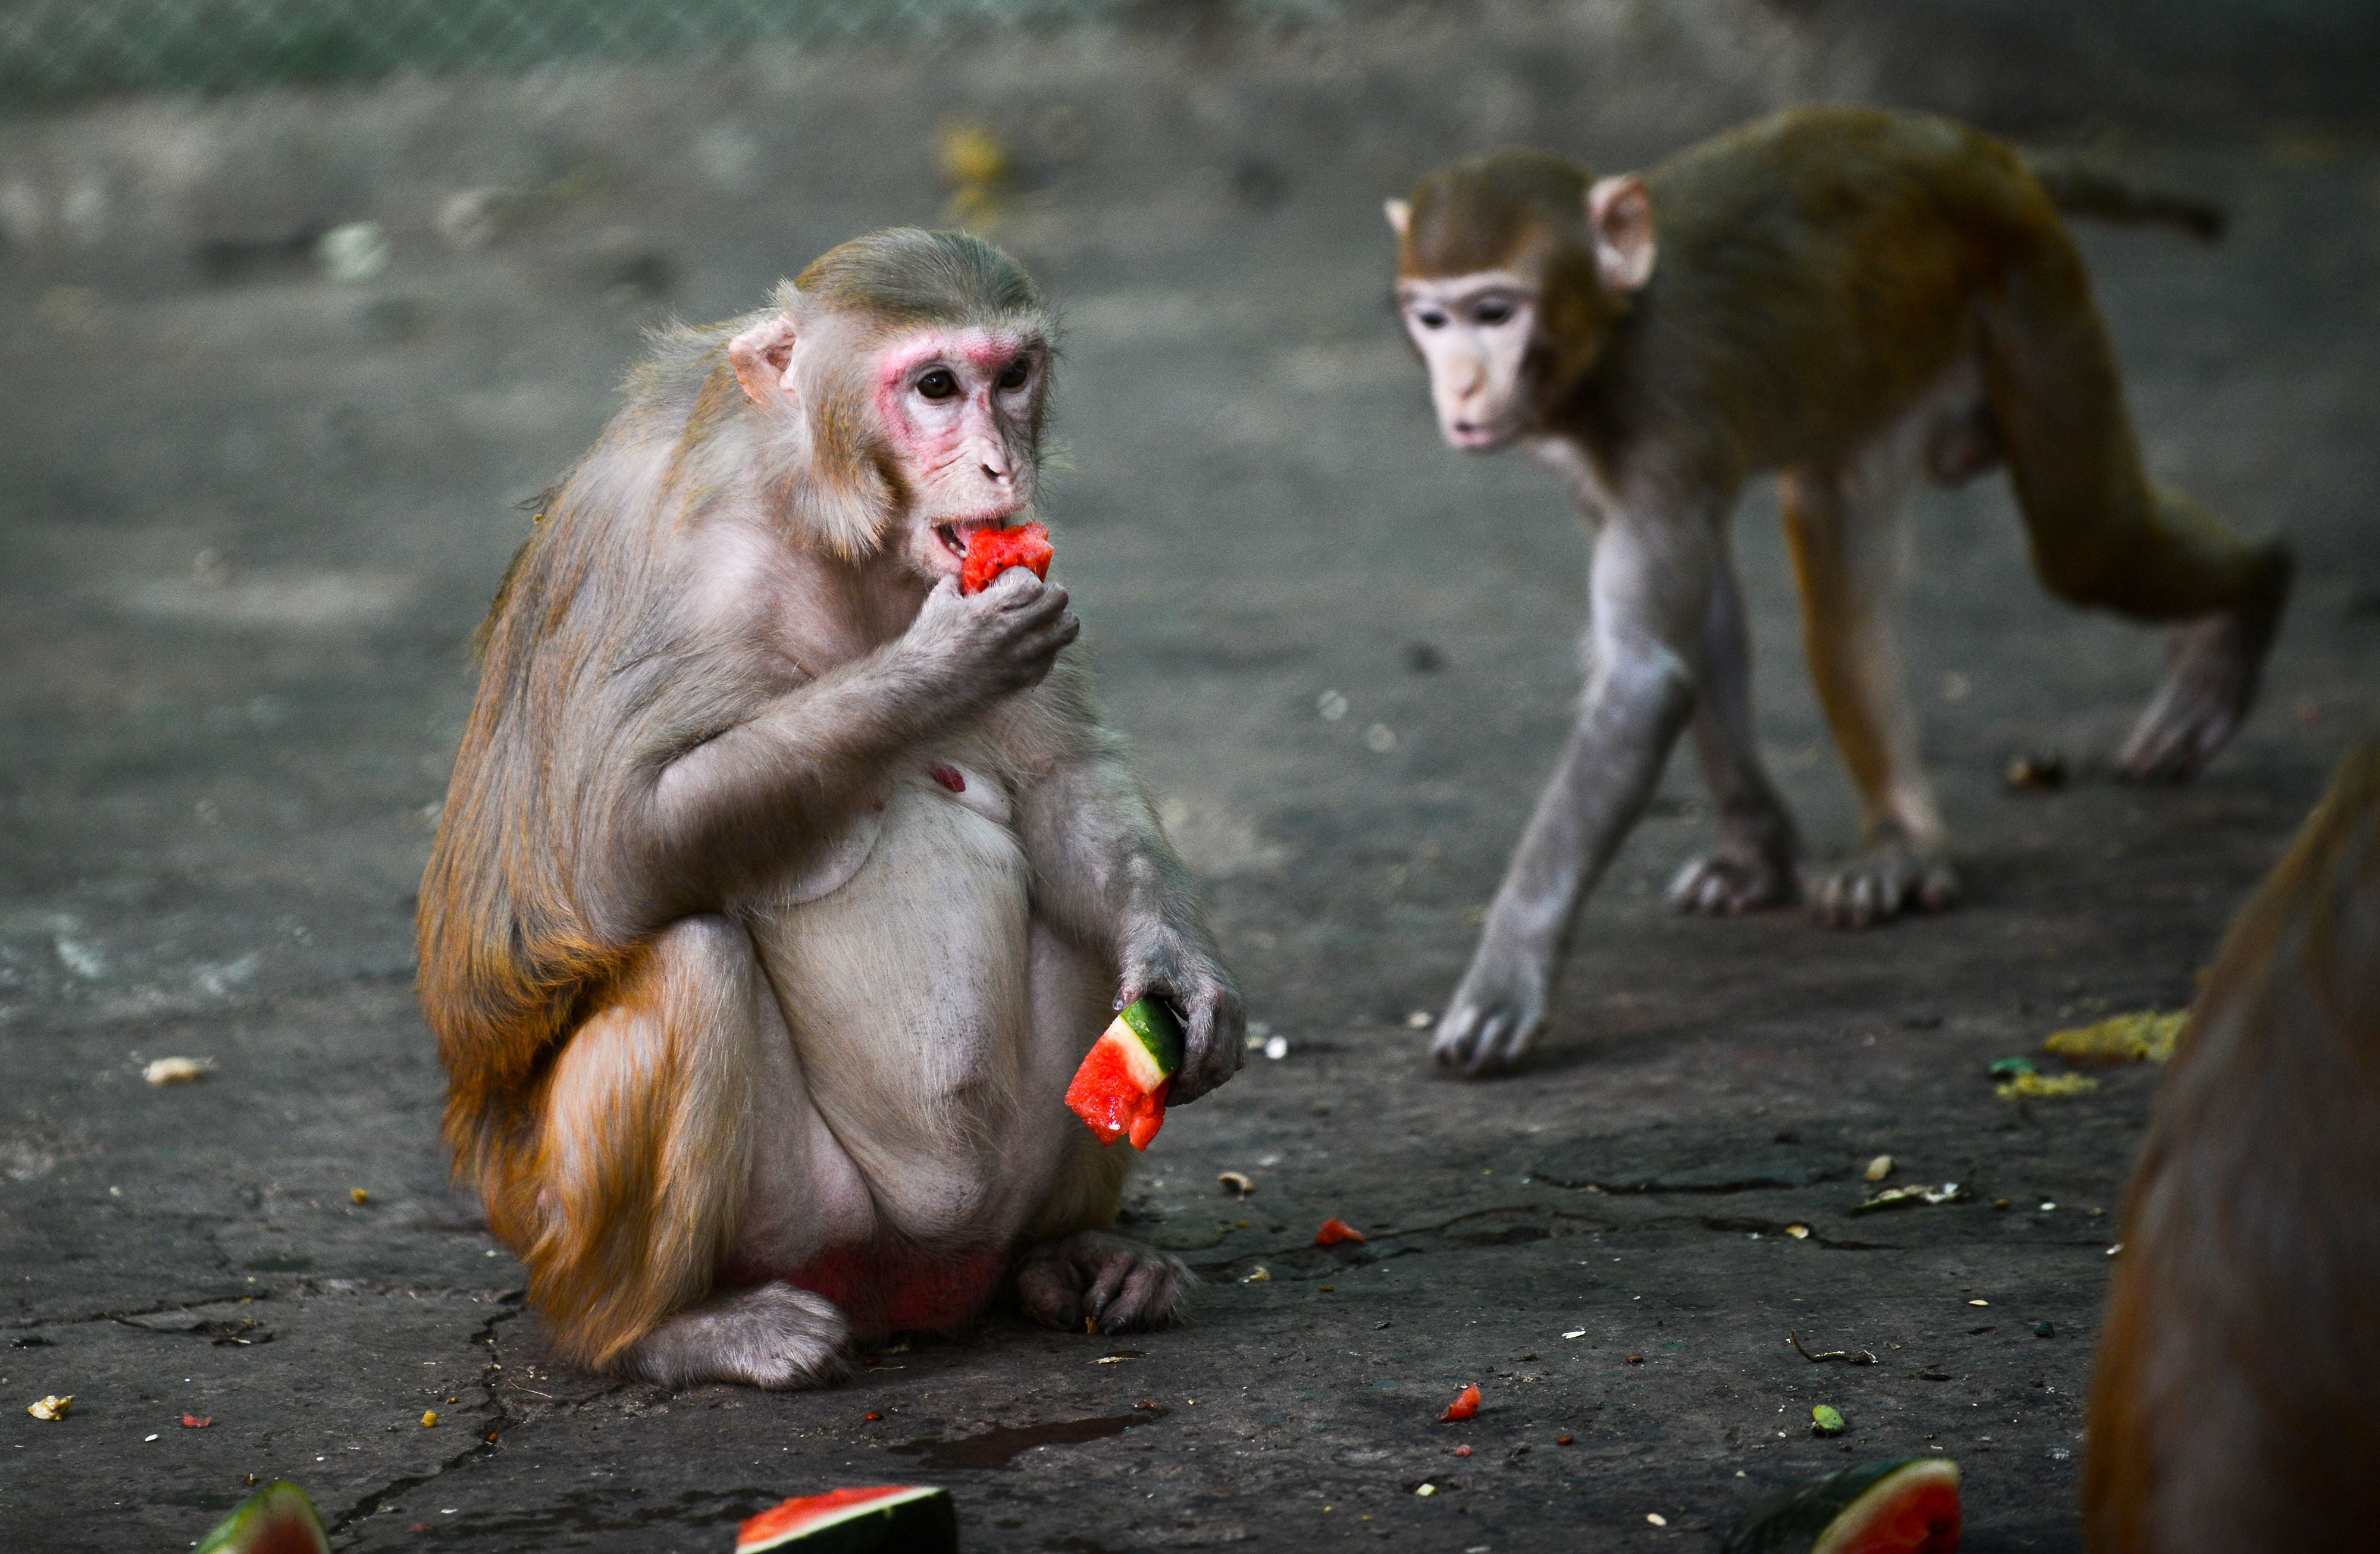 The rhesus macaque has been shown to be suscepitble to coronavirus